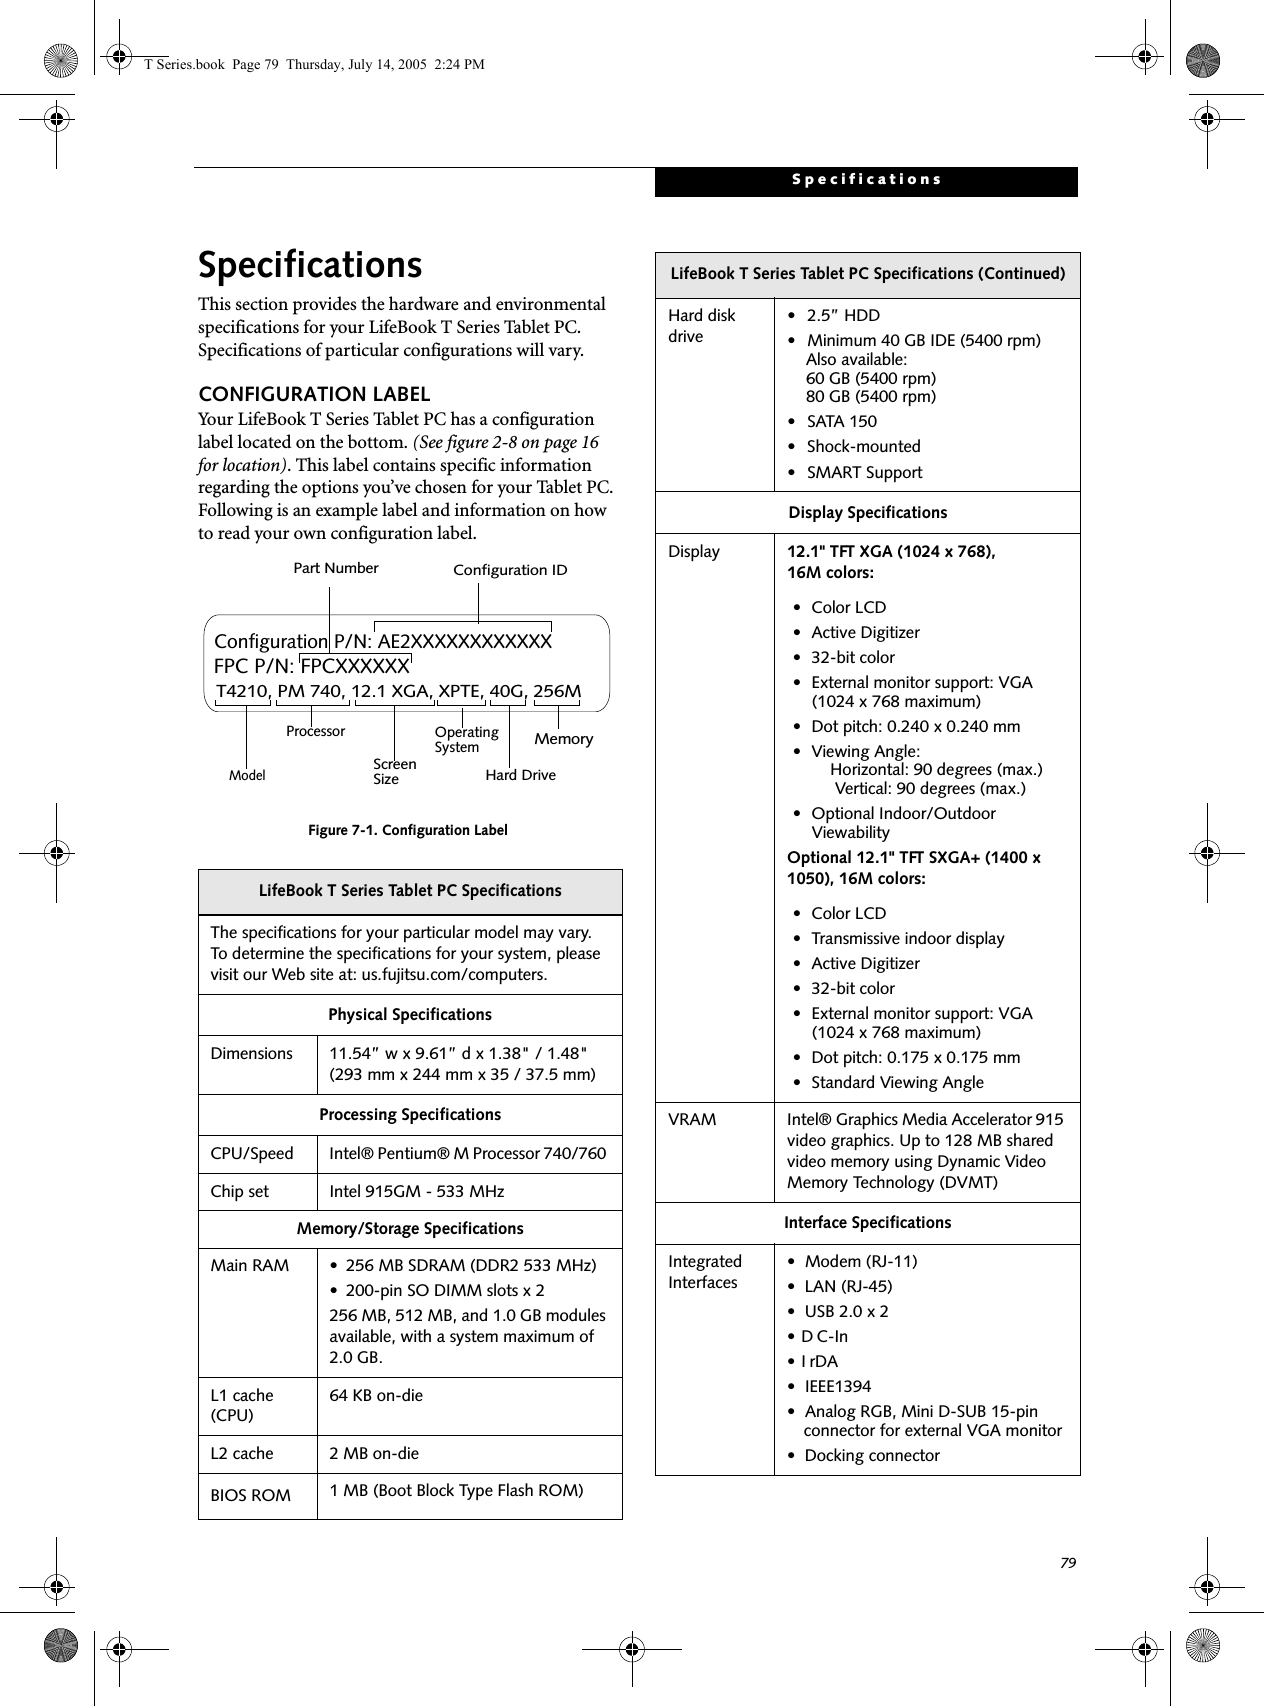 79SpecificationsSpecificationsThis section provides the hardware and environmental specifications for your LifeBook T Series Tablet PC. Specifications of particular configurations will vary.CONFIGURATION LABELYour LifeBook T Series Tablet PC has a configuration label located on the bottom. (See figure 2-8 on page 16 for location). This label contains specific information regarding the options you’ve chosen for your Tablet PC. Following is an example label and information on how to read your own configuration label.Figure 7-1. Configuration LabelLifeBook T Series Tablet PC SpecificationsThe specifications for your particular model may vary. To determine the specifications for your system, please visit our Web site at: us.fujitsu.com/computers.Physical SpecificationsDimensions 11.54” w x 9.61” d x 1.38&quot; / 1.48&quot; (293 mm x 244 mm x 35 / 37.5 mm)Processing SpecificationsCPU/Speed Intel® Pentium® M Processor 740/760 Chip set Intel 915GM - 533 MHzMemory/Storage SpecificationsMain RAM • 256 MB SDRAM (DDR2 533 MHz)• 200-pin SO DIMM slots x 2256 MB, 512 MB, and 1.0 GB modules available, with a system maximum of 2.0 GB.L1 cache (CPU)64 KB on-die L2 cache 2 MB on-die BIOS ROM 1 MB (Boot Block Type Flash ROM)T4210, PM 740, 12.1 XGA, XPTE, 40G, 256MConfiguration P/N: AE2XXXXXXXXXXXXFPC P/N: FPCXXXXXXModelProcessorScreenSizeOperatingSystemHard Drive MemoryPart NumberConfiguration IDHard disk drive• 2.5” HDD• Minimum 40 GB IDE (5400 rpm)Also available:60 GB (5400 rpm)80 GB (5400 rpm)• SATA 150• Shock-mounted• SMART SupportDisplay SpecificationsDisplay 12.1&quot; TFT XGA (1024 x 768), 16M colors:• Color LCD• Active Digitizer• 32-bit color• External monitor support: VGA (1024 x 768 maximum)• Dot pitch: 0.240 x 0.240 mm• Viewing Angle:    Horizontal: 90 degrees (max.)     Vertical: 90 degrees (max.)• Optional Indoor/Outdoor ViewabilityOptional 12.1&quot; TFT SXGA+ (1400 x 1050), 16M colors:• Color LCD• Transmissive indoor display• Active Digitizer• 32-bit color• External monitor support: VGA (1024 x 768 maximum)• Dot pitch: 0.175 x 0.175 mm• Standard Viewing AngleVRAM Intel® Graphics Media Accelerator 915 video graphics. Up to 128 MB shared video memory using Dynamic Video Memory Technology (DVMT)Interface SpecificationsIntegrated Interfaces• Modem (RJ-11)• LAN (RJ-45)• USB 2.0 x 2•DC-In•IrDA• IEEE1394• Analog RGB, Mini D-SUB 15-pin connector for external VGA monitor• Docking connectorLifeBook T Series Tablet PC Specifications (Continued)T Series.book  Page 79  Thursday, July 14, 2005  2:24 PM